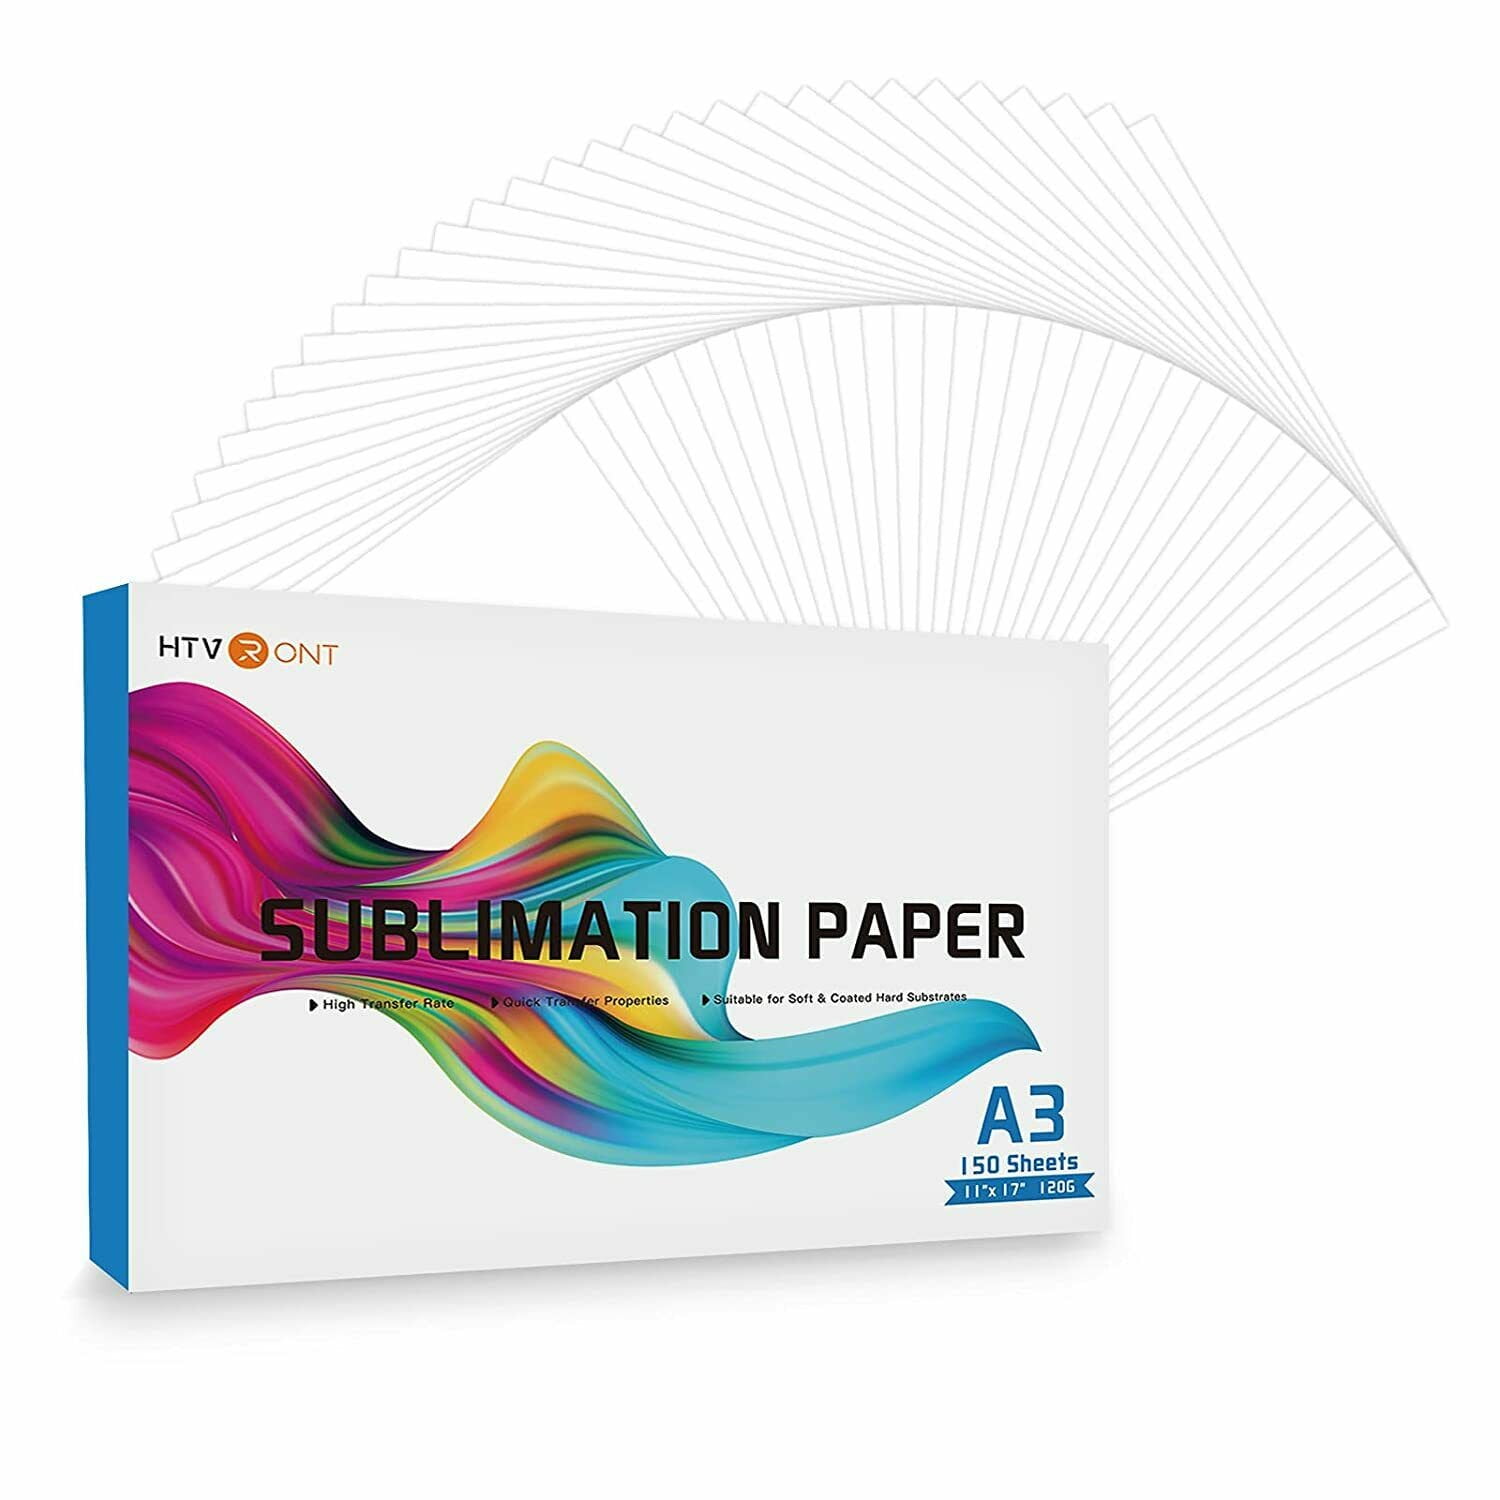  HTVRONT Sublimation Paper 8.5 x 11 inches - 30 Sheets  Sublimation Transfer Paper Compatible with Inkjet Printer, Easy to Transfer  120 gsm Sublimination Paper for tumblers, T-shirts, Mugs : Office Products